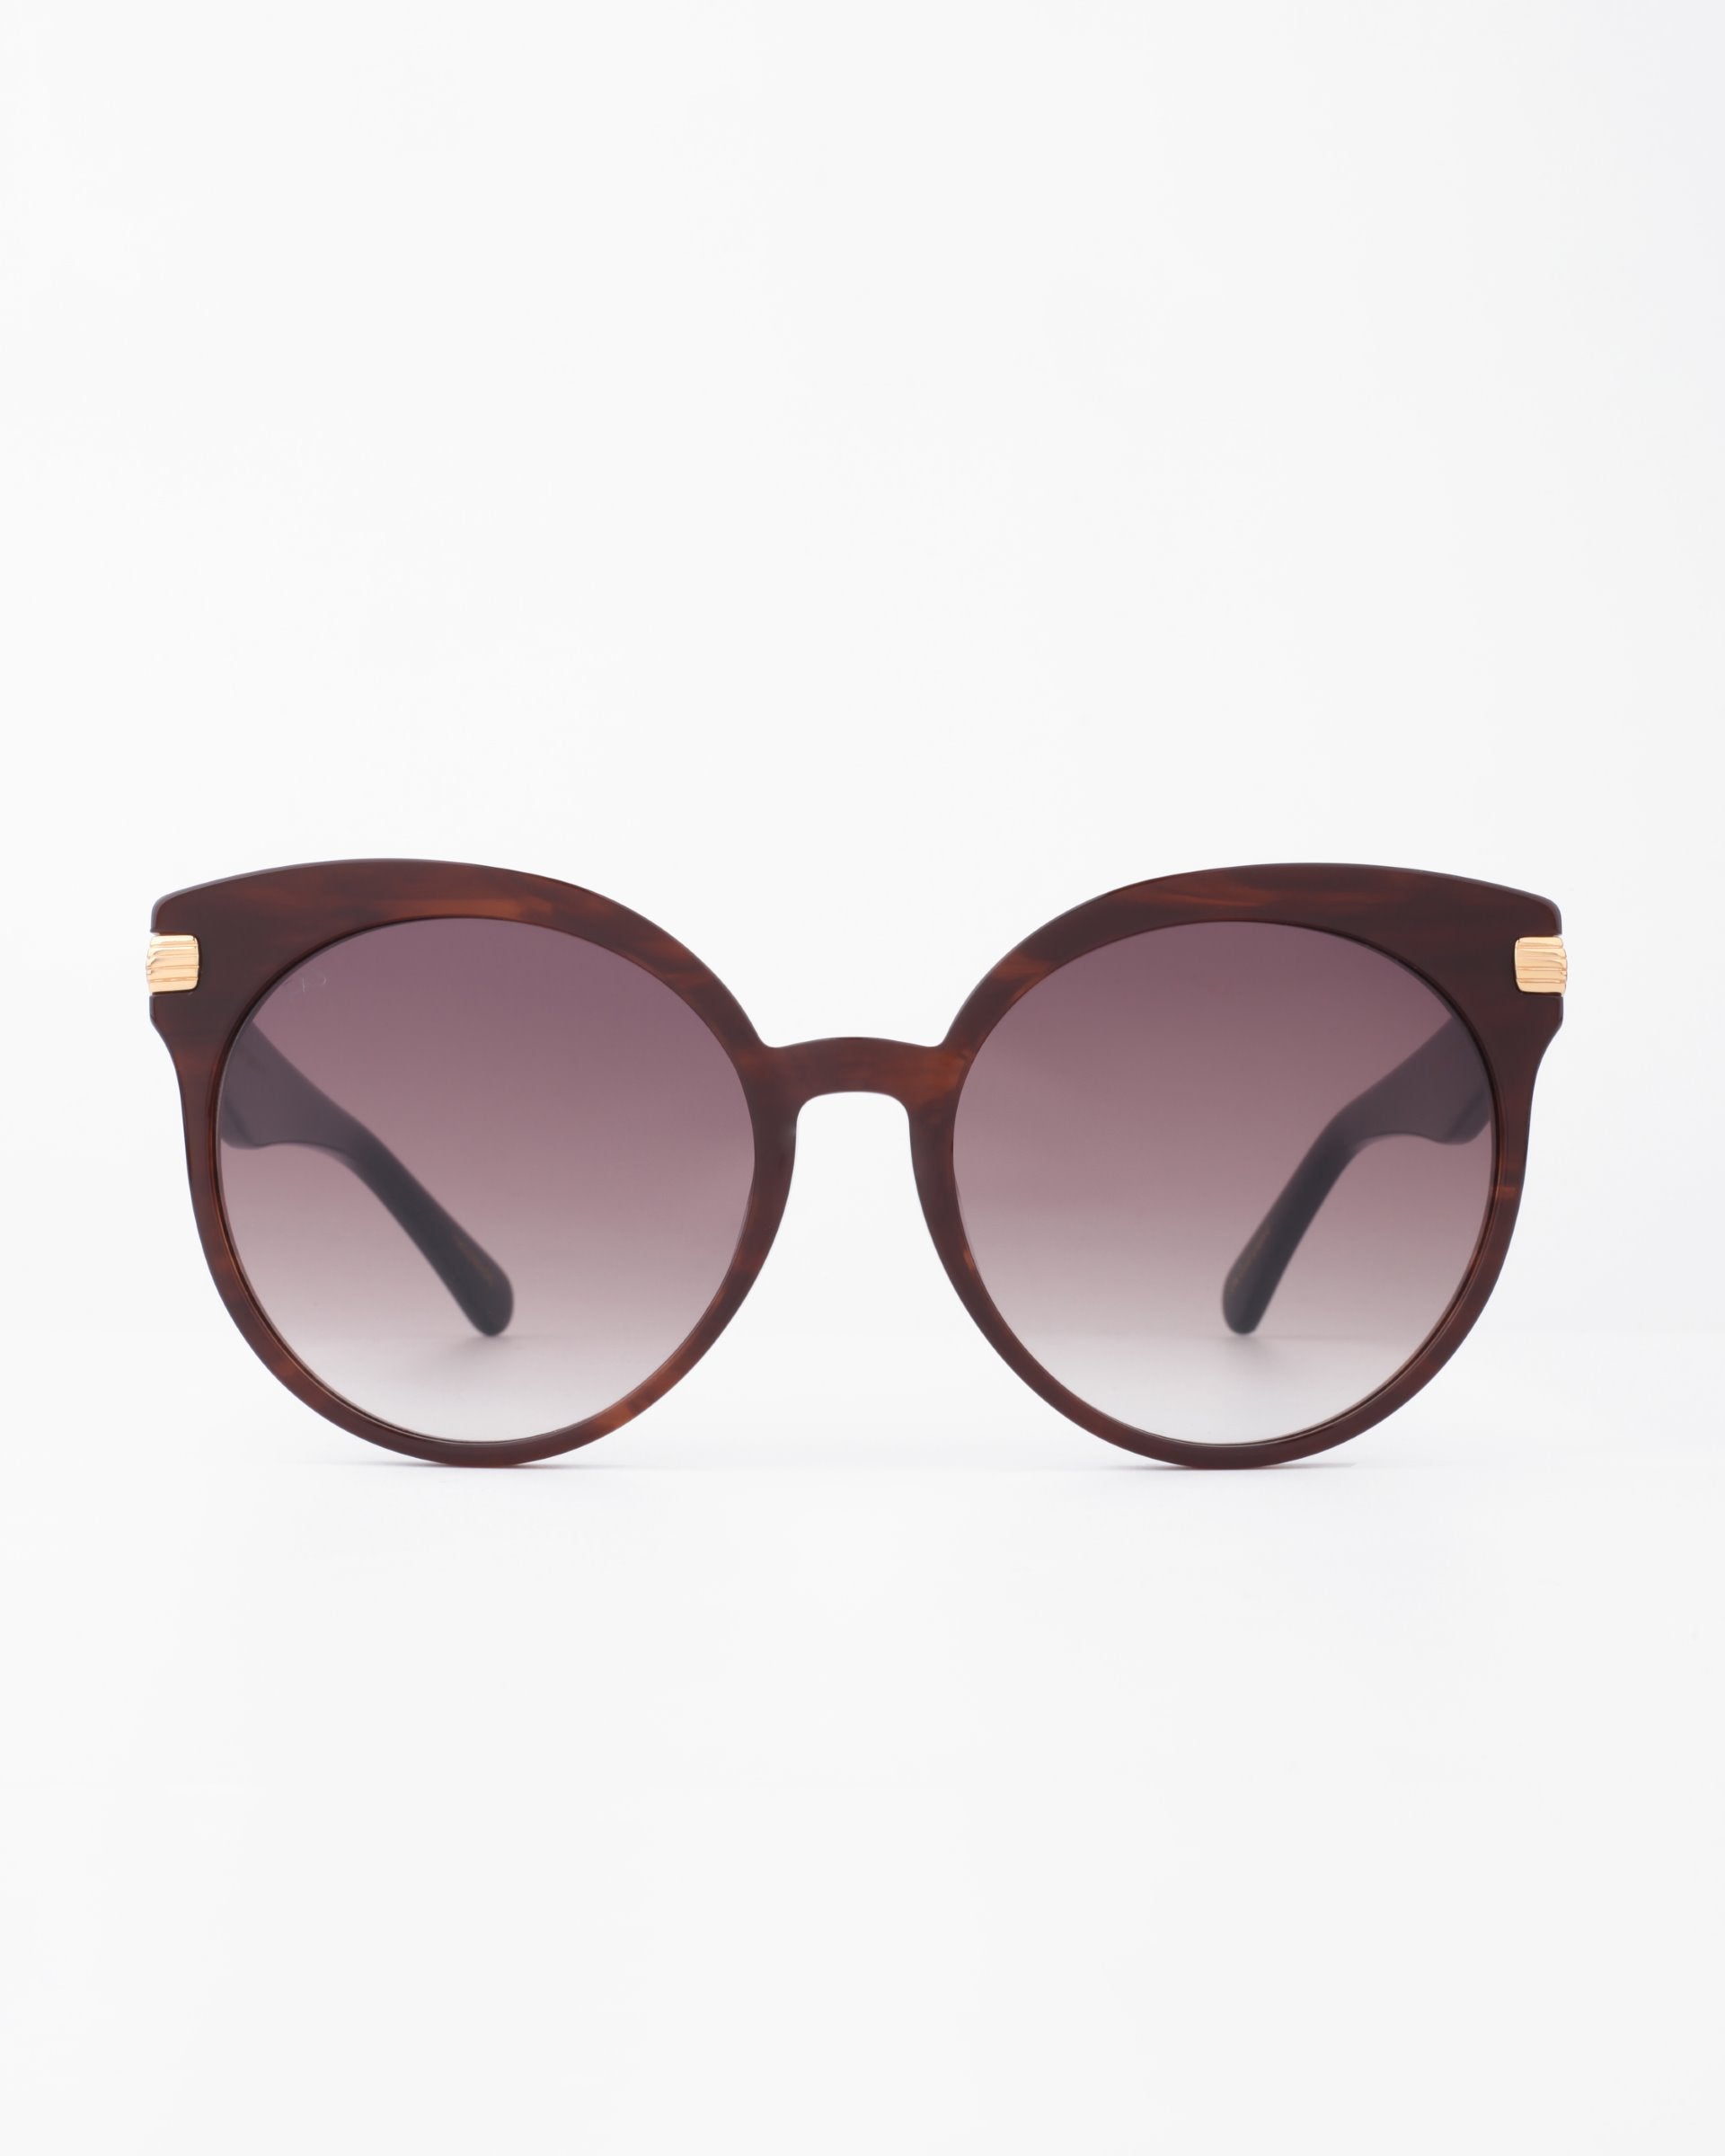 The Muse by For Art's Sake® is a pair of round brown sunglasses with gradient lenses, featuring 18-karat gold-plated temples. Crafted from handmade plant-based acetate, the Muse sunglasses are placed on a white surface with a minimalistic background.